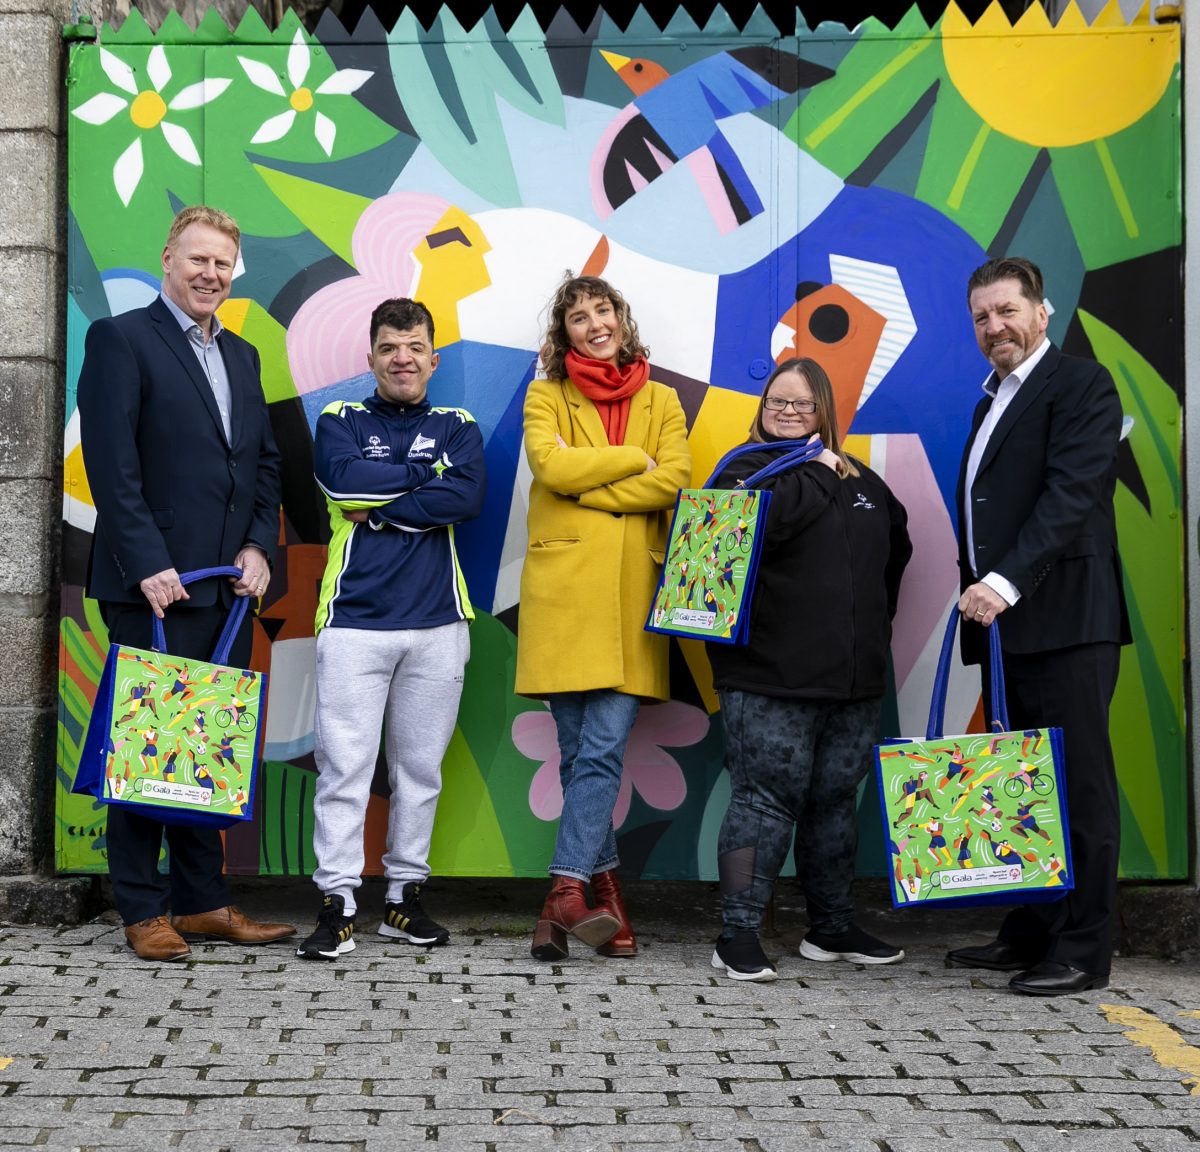 Gala Retail teams up with artist to launch limited edition shopper in support of Special Olympics Ireland